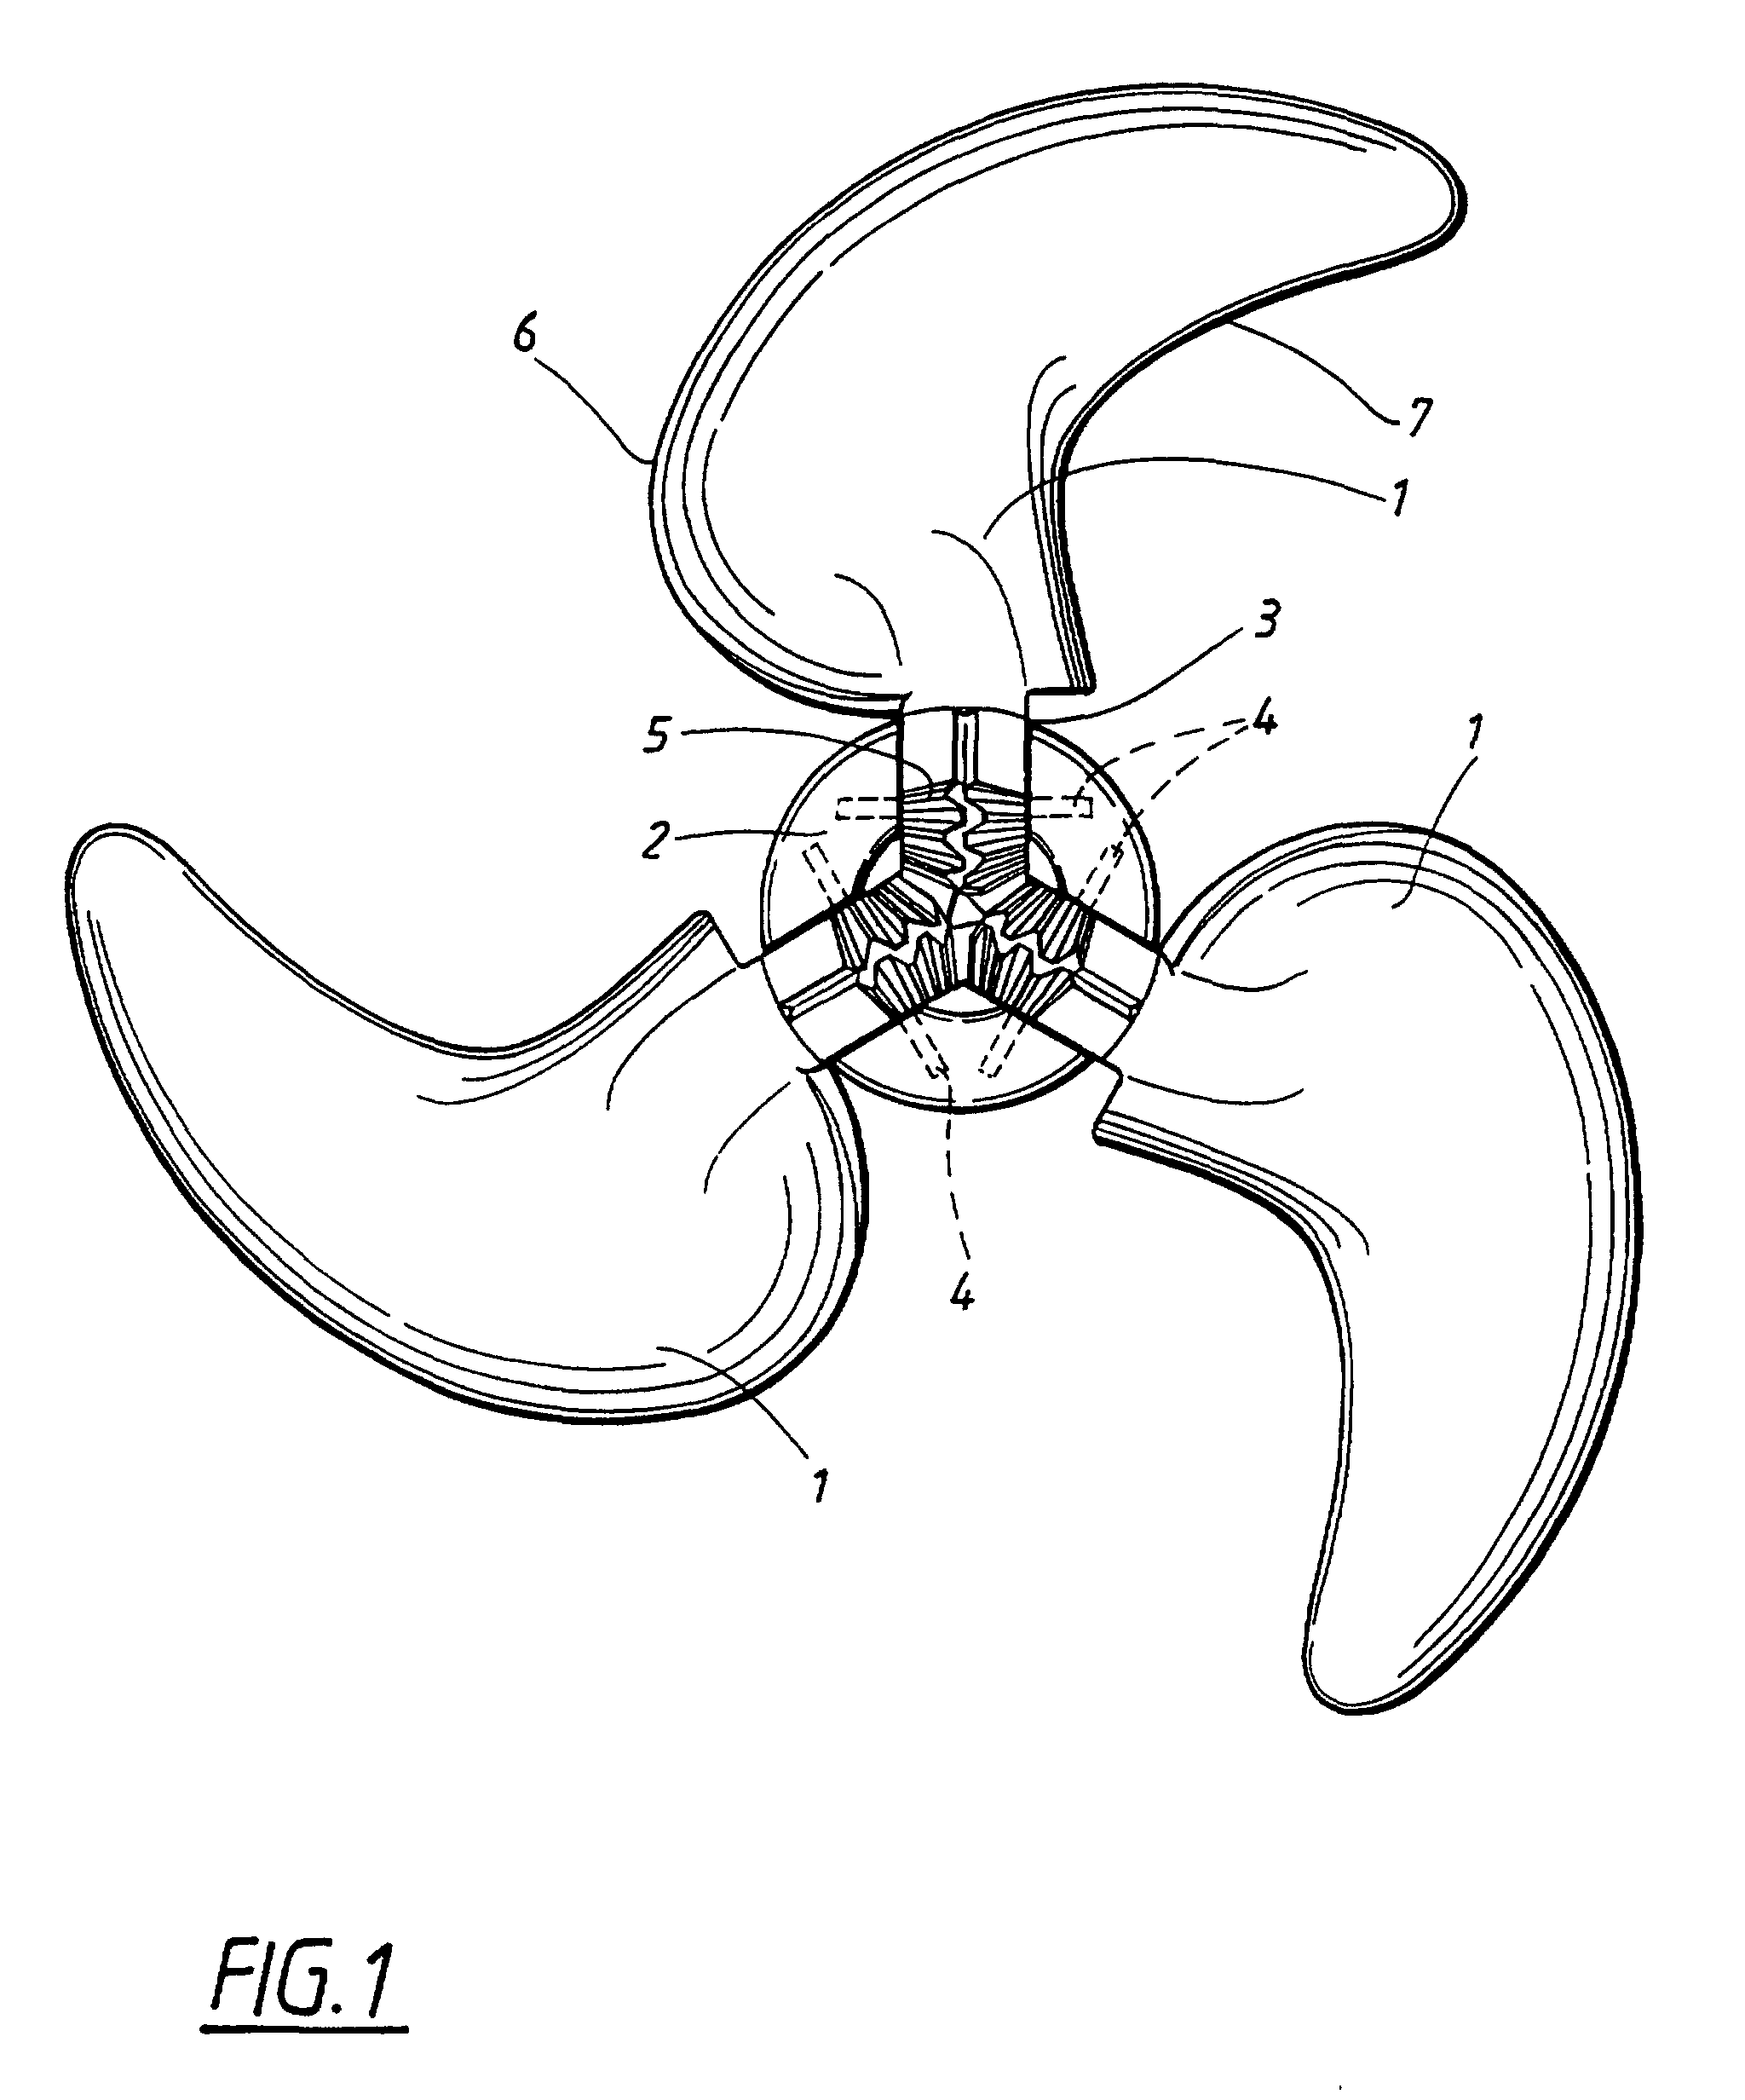 How To Draw A Propeller